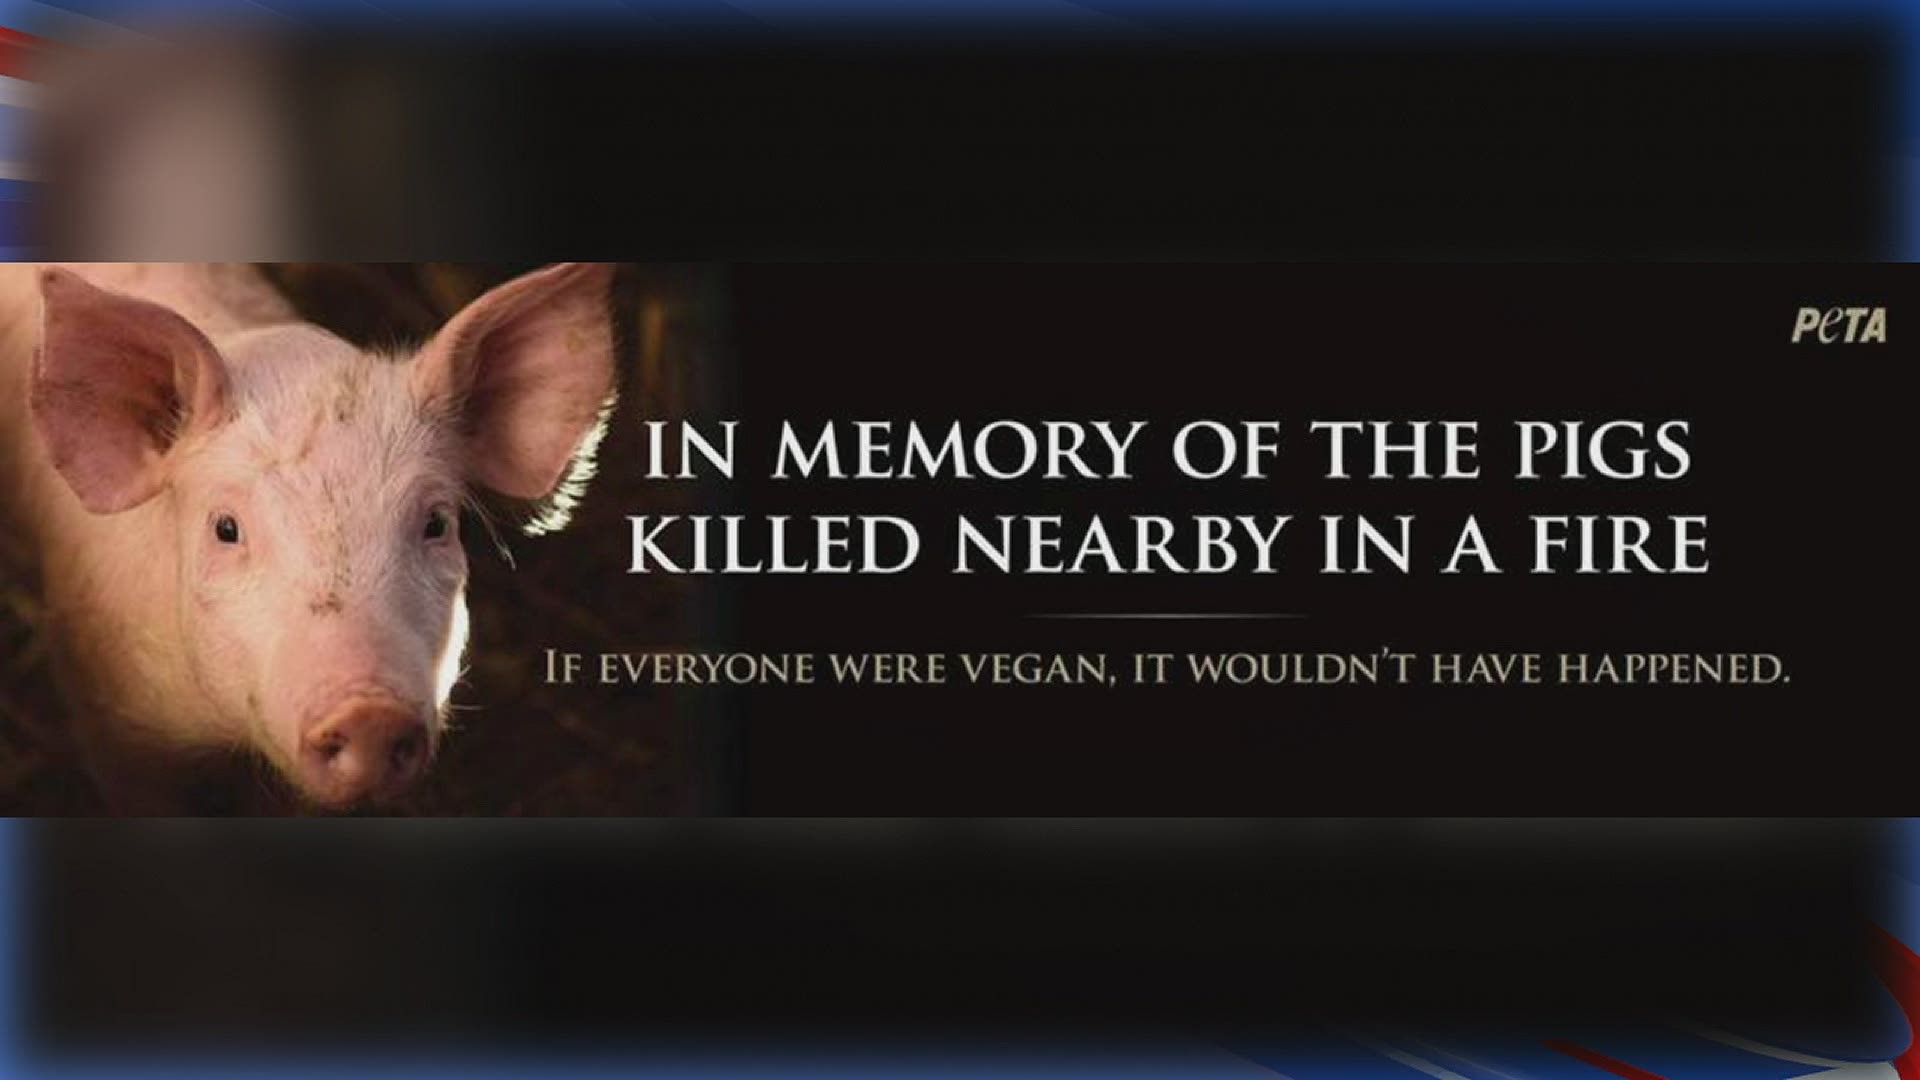 Billboards being placed in the area are encouraging people to go vegan.